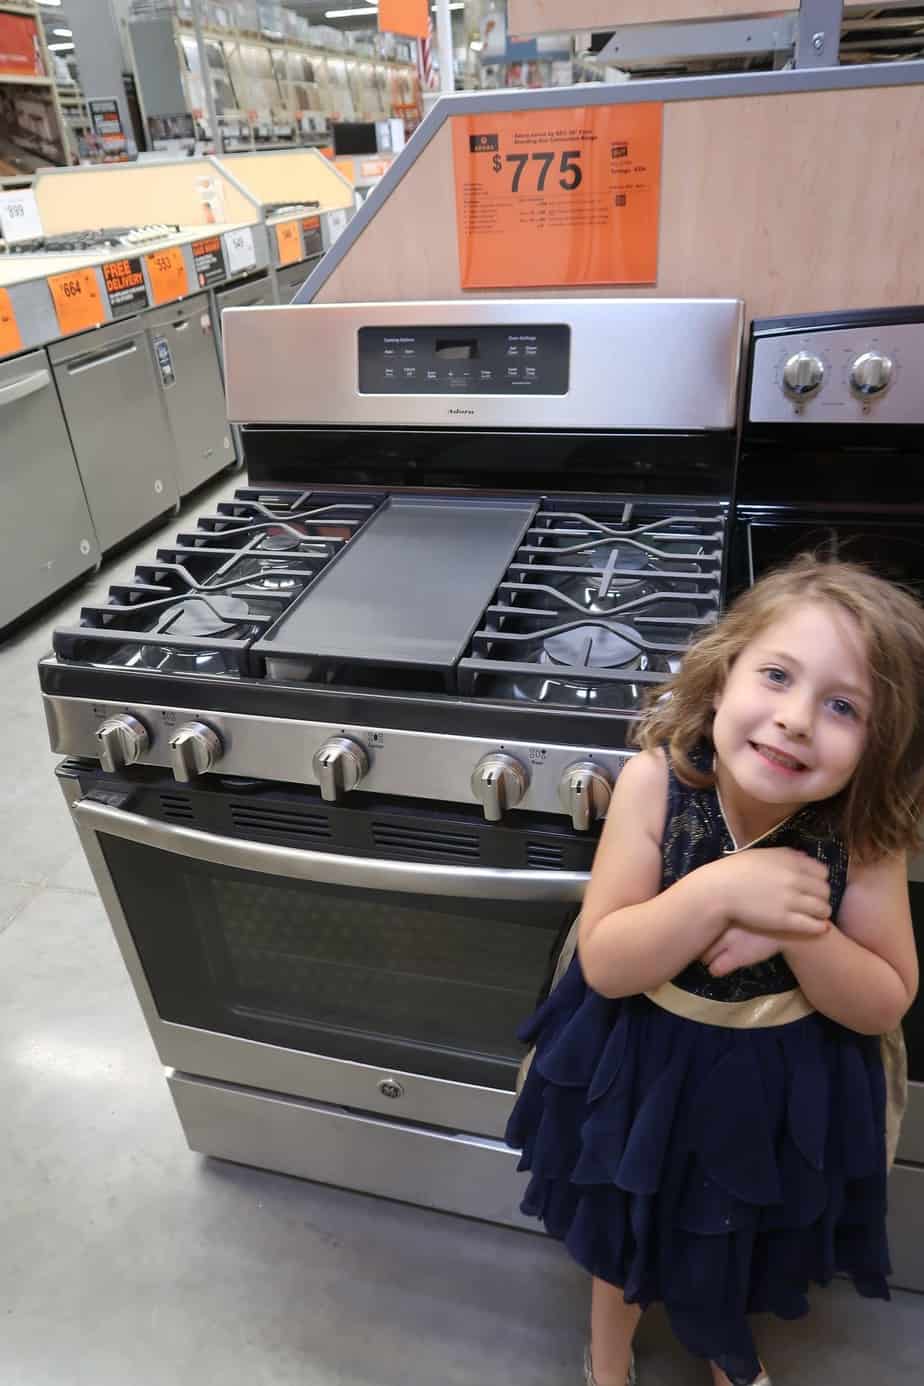 How to Purchase Kitchen Appliances When You're Cheap